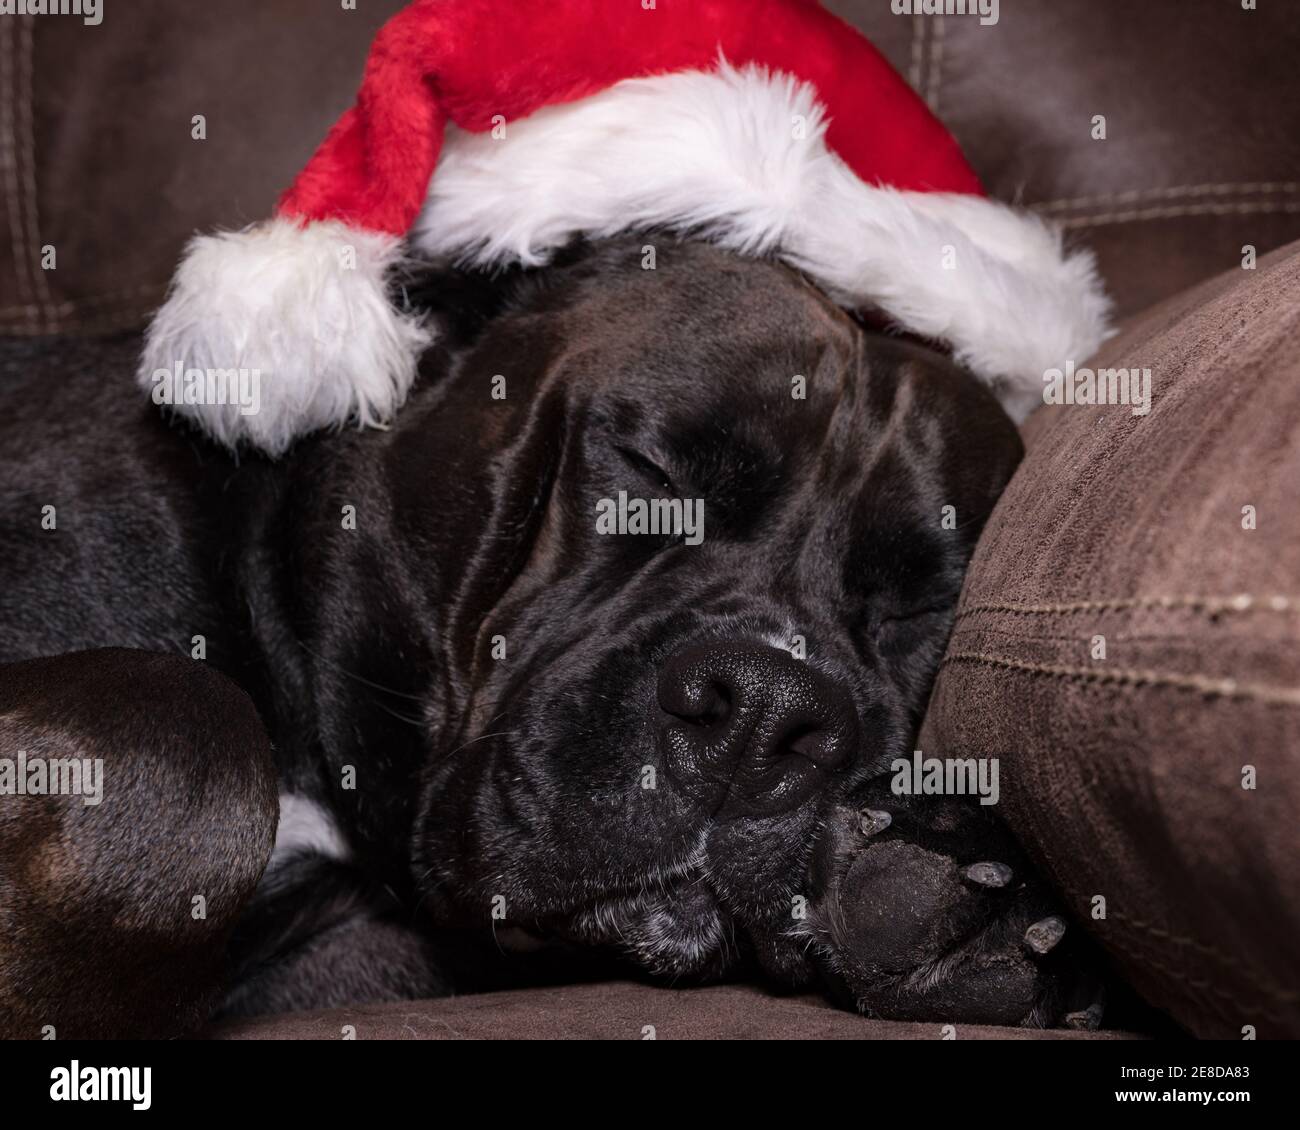 Large black dog sleeping on a couch with a santa's hat on his head Stock Photo